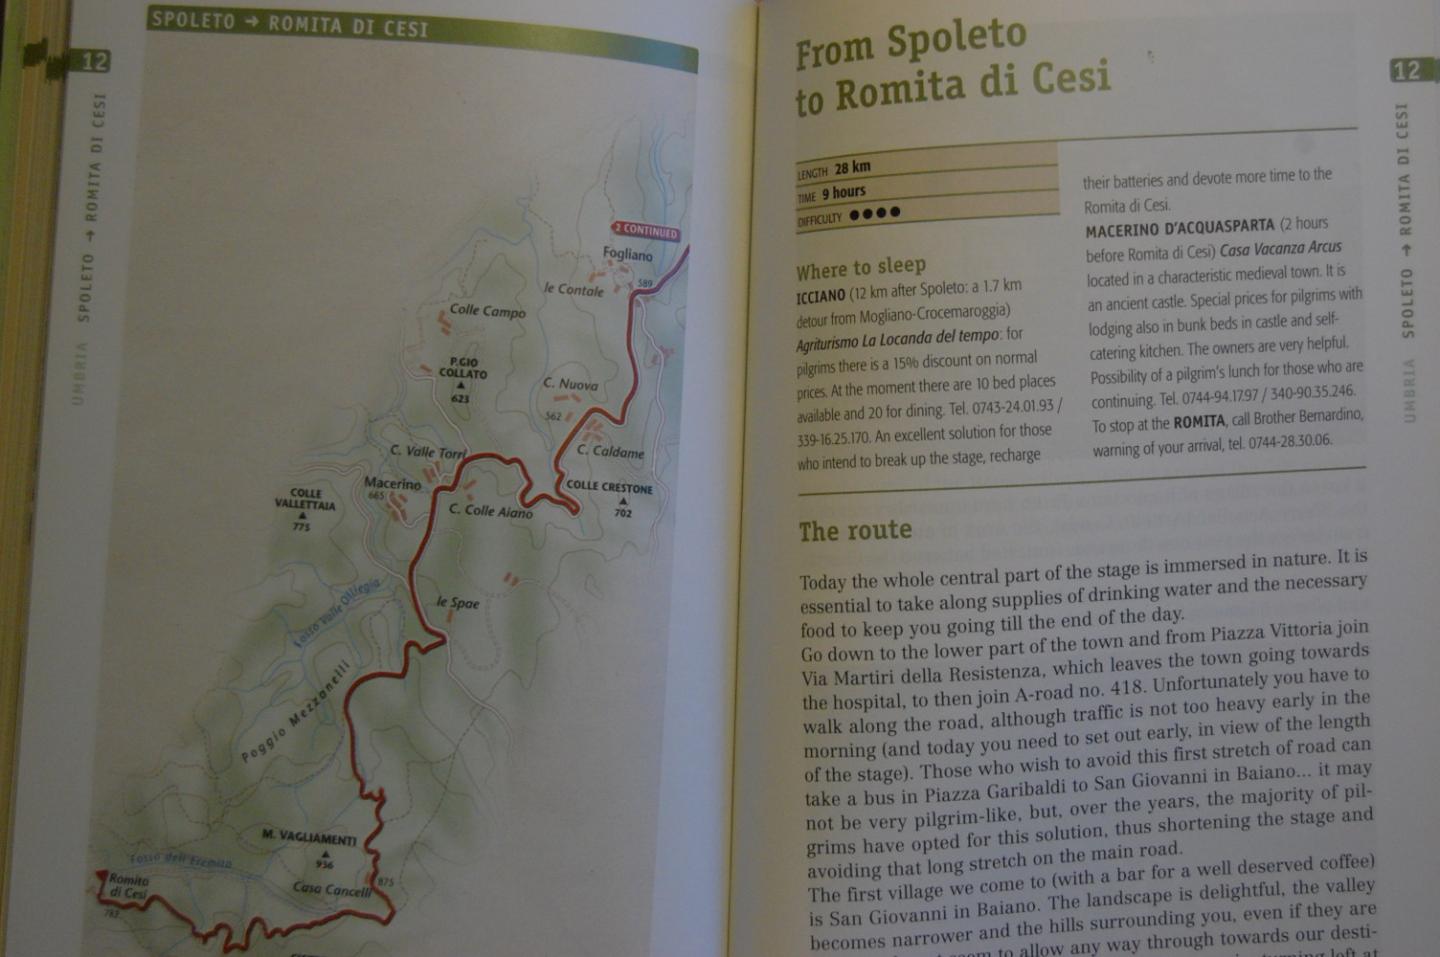 Seracchioli, Angela Maria - On the road with Saint Francis / By foot or by bike